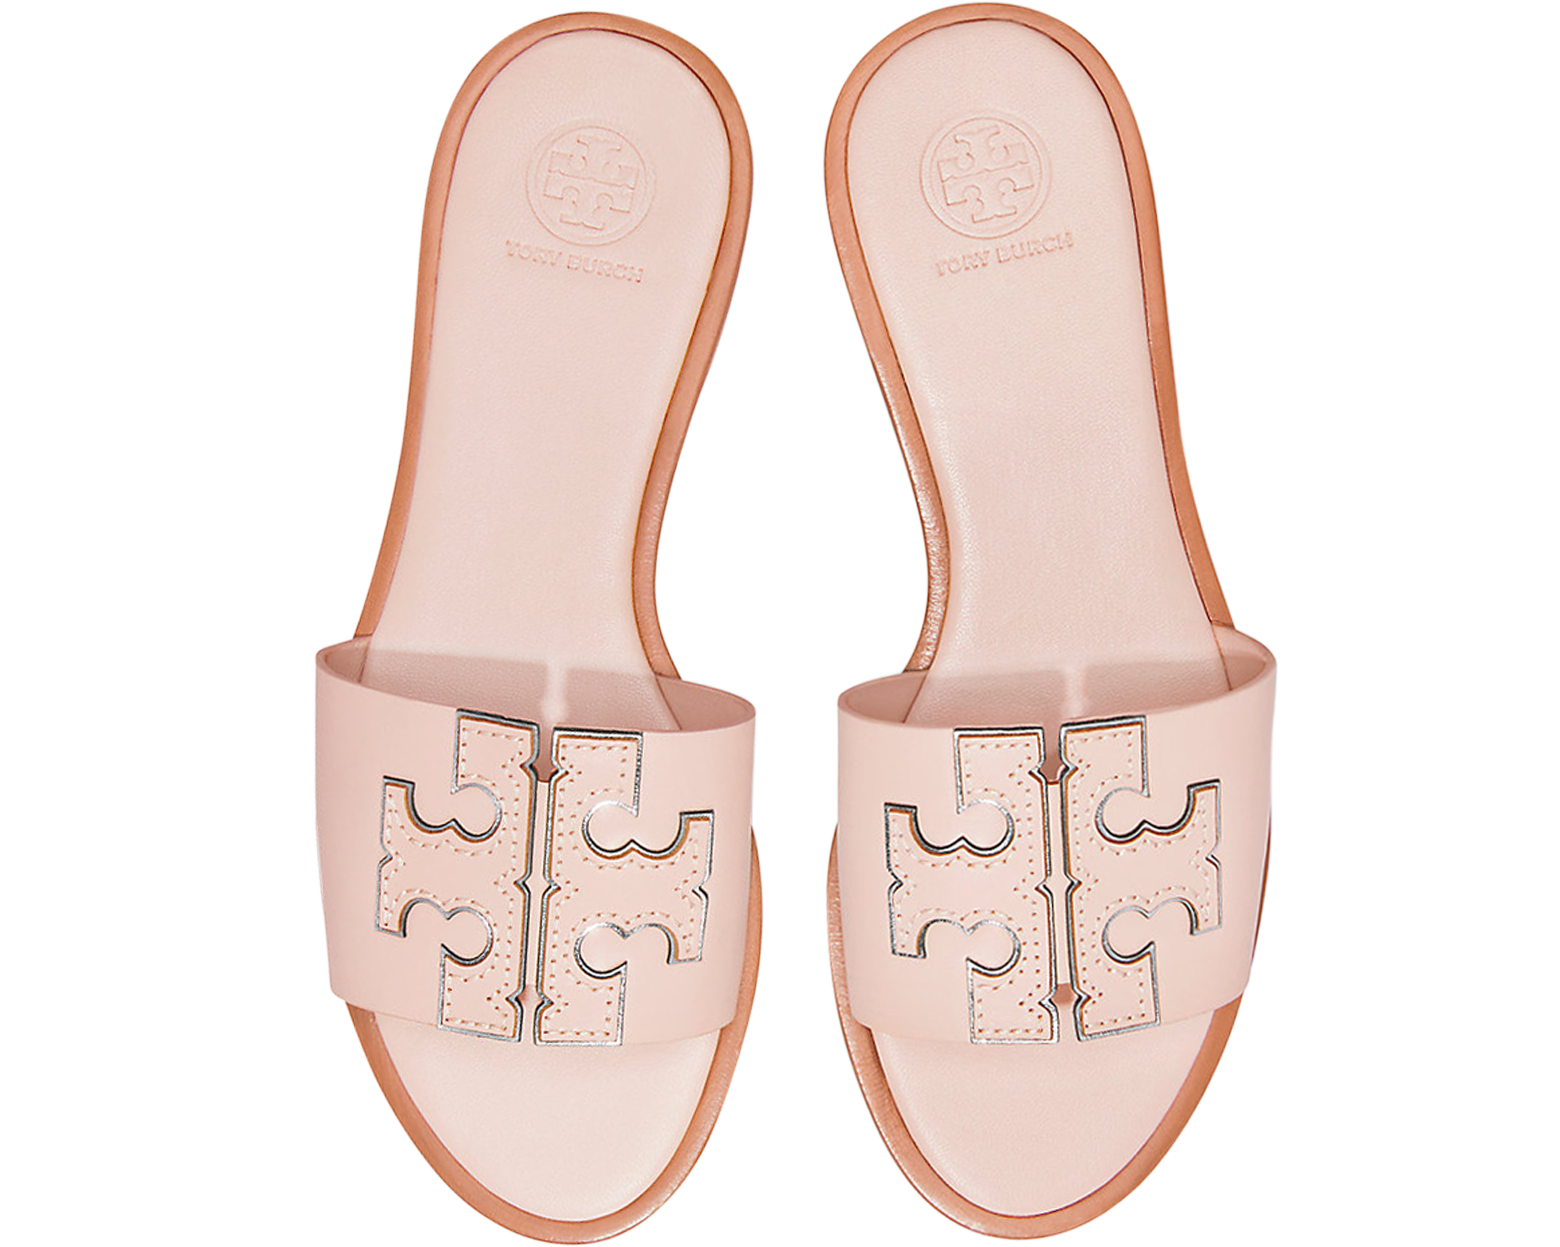 Tory Burch Sea Shell Calf Leather Ines Slides 5 US at FORZIERI